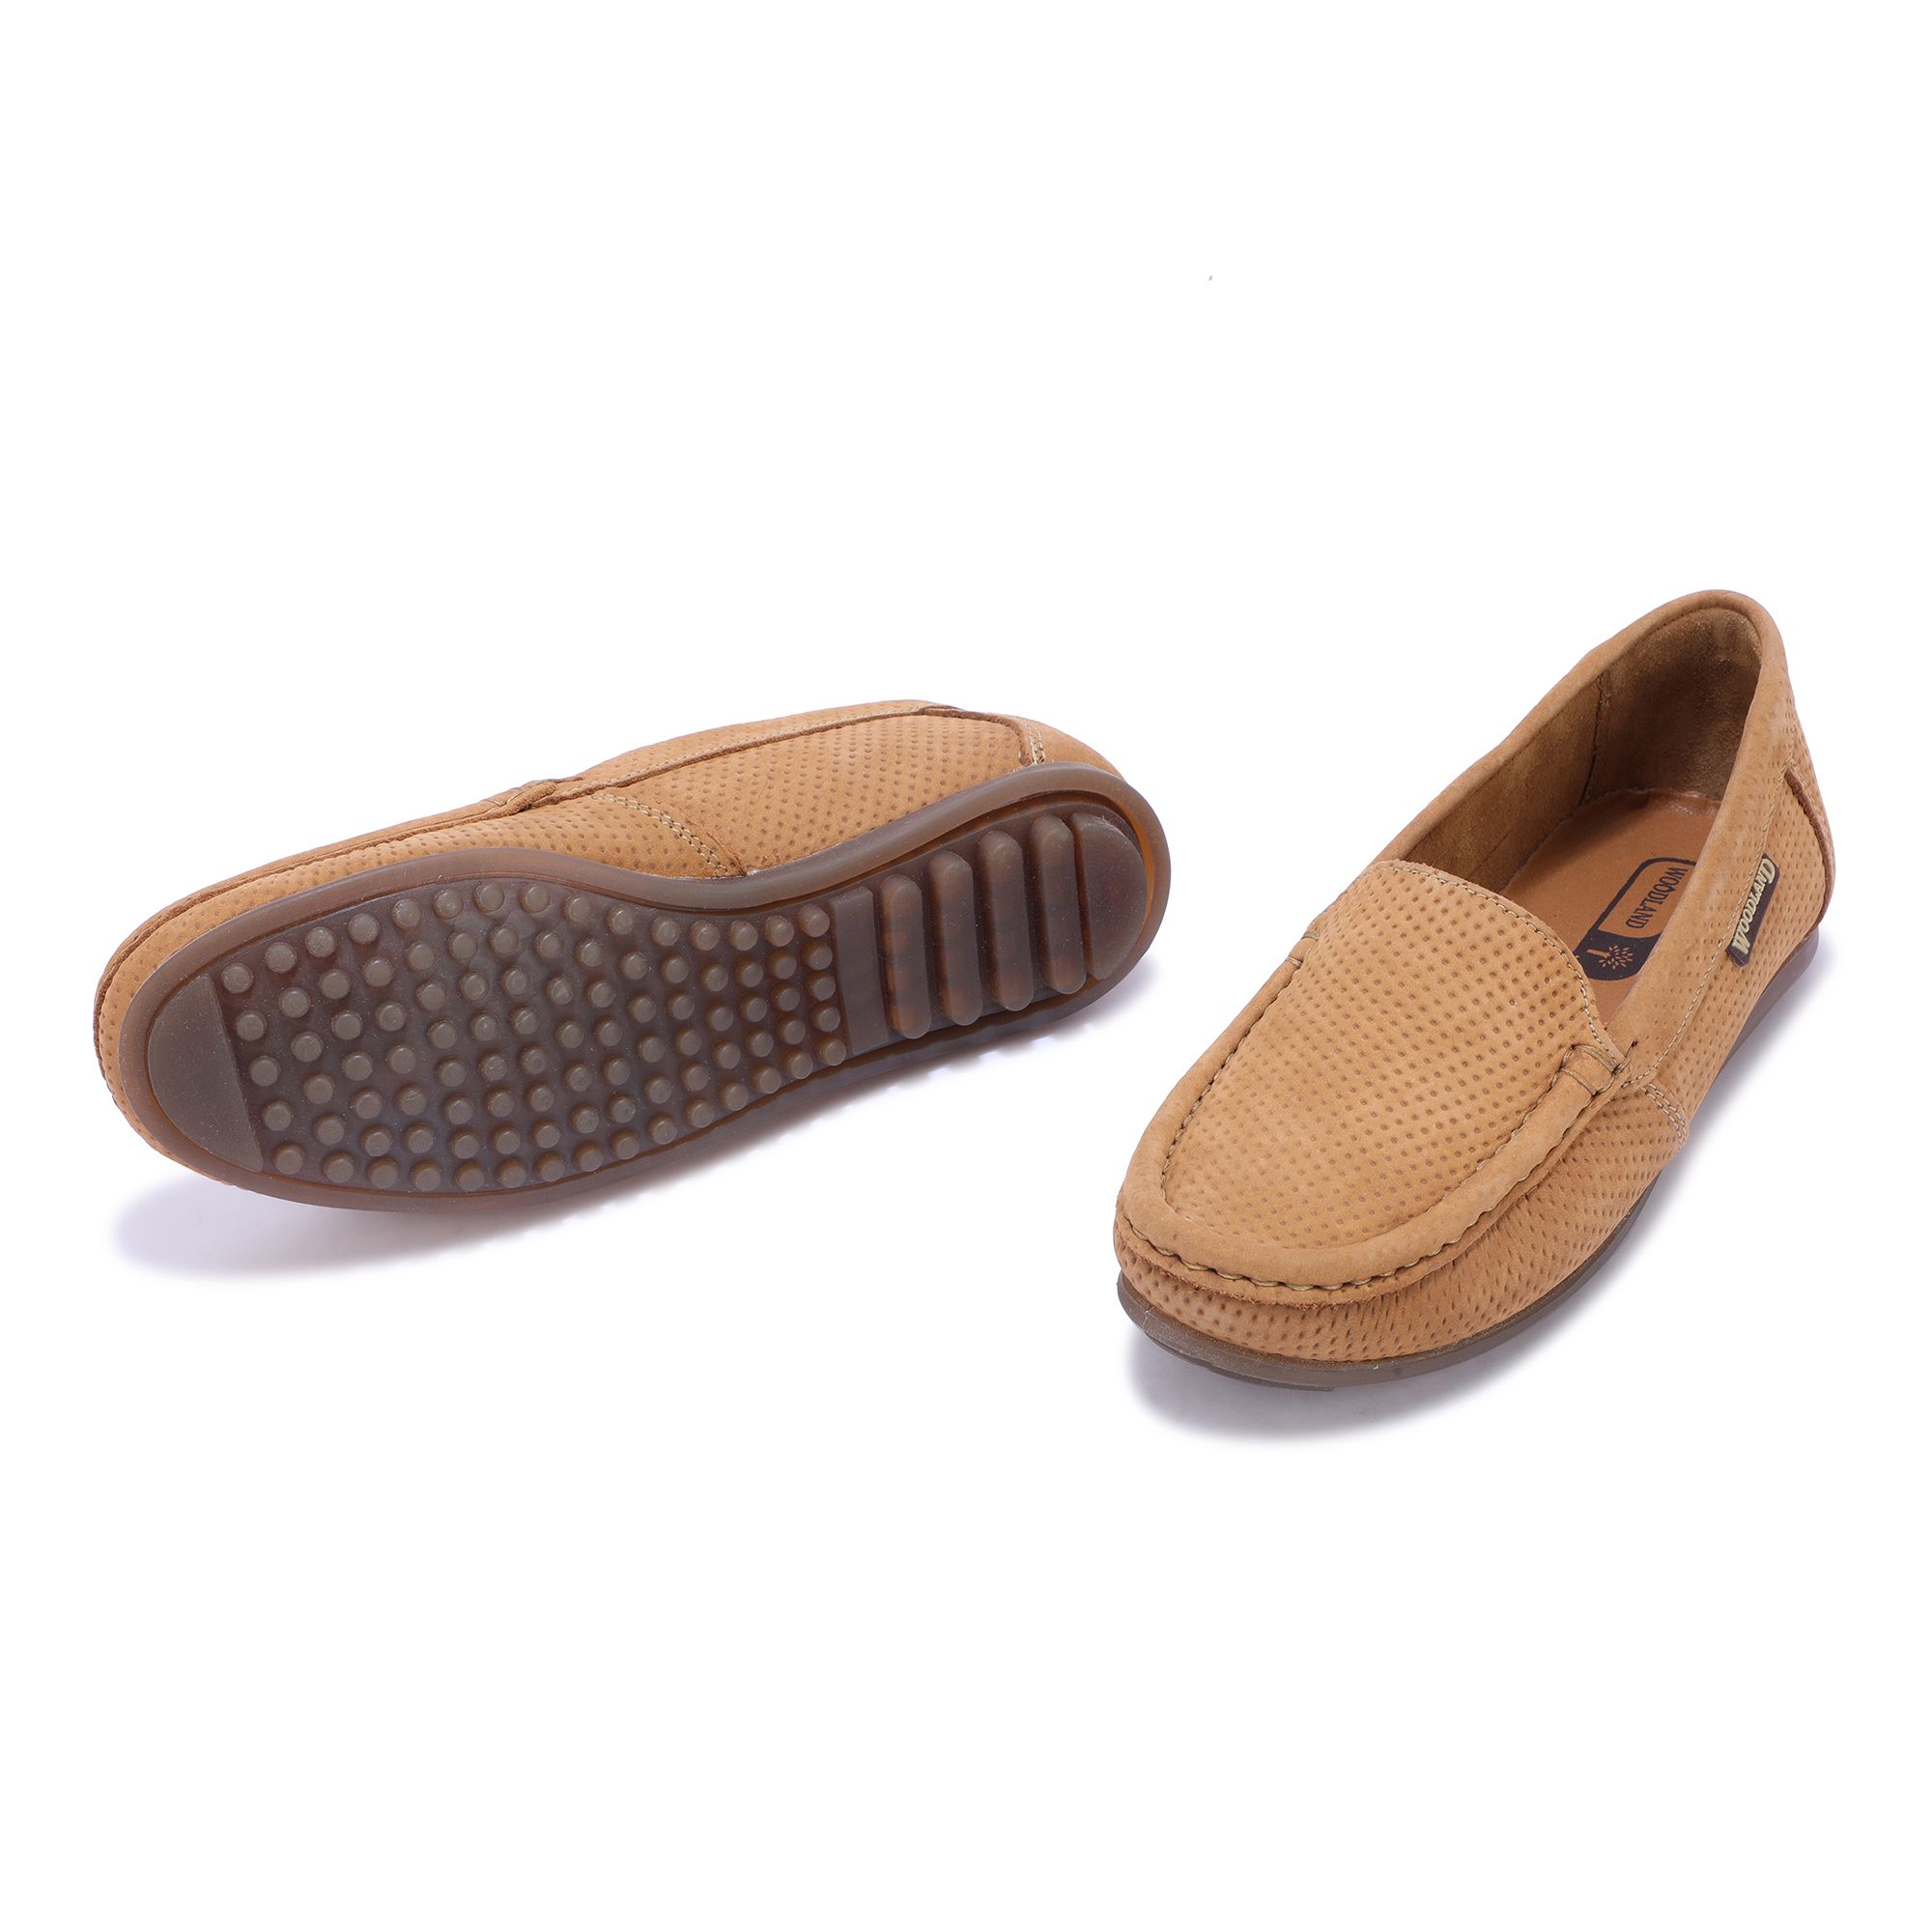 camel loafers for women